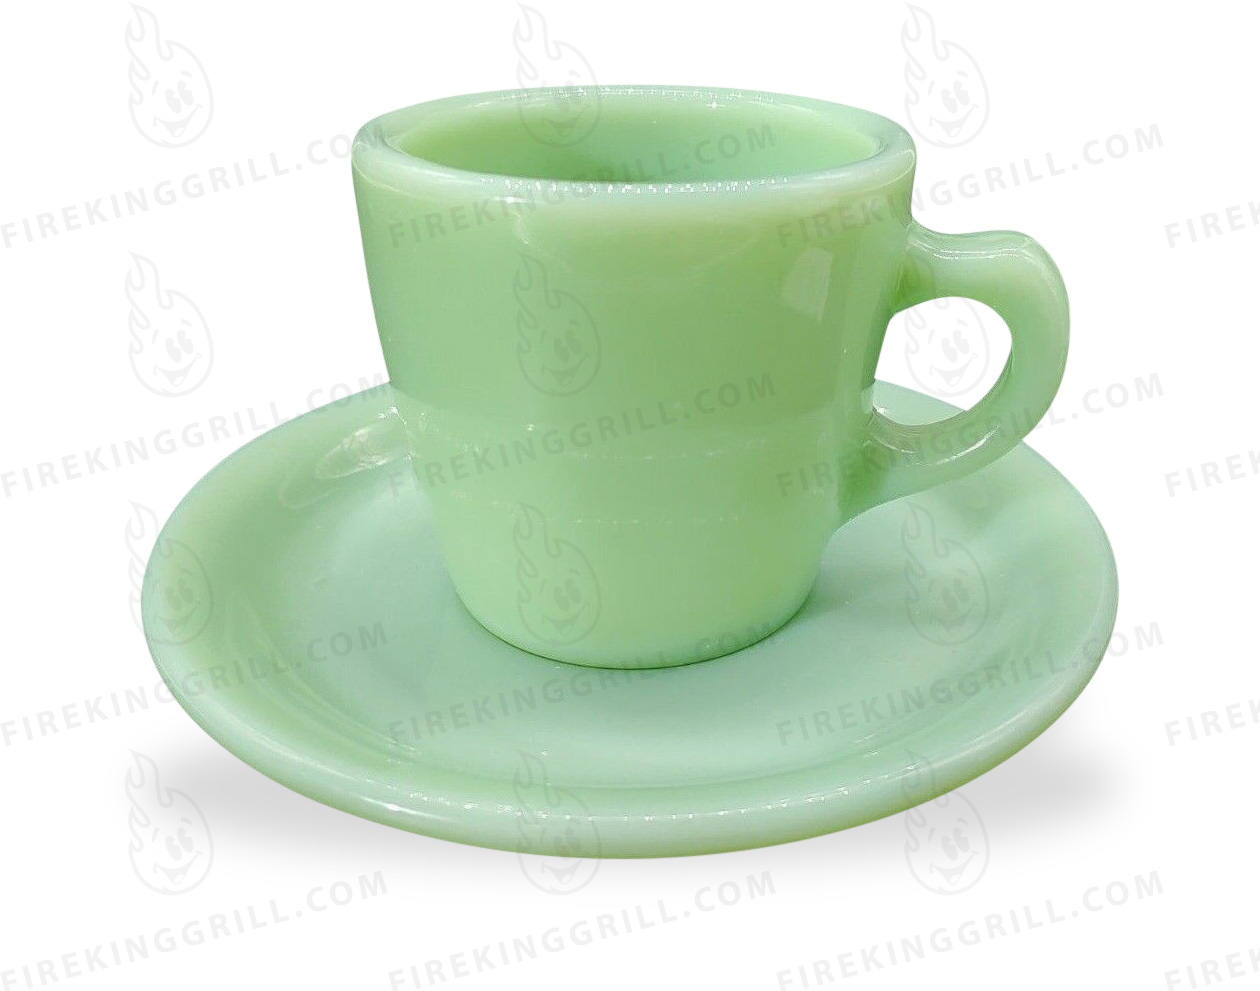 Straight sided/tall cup and saucer